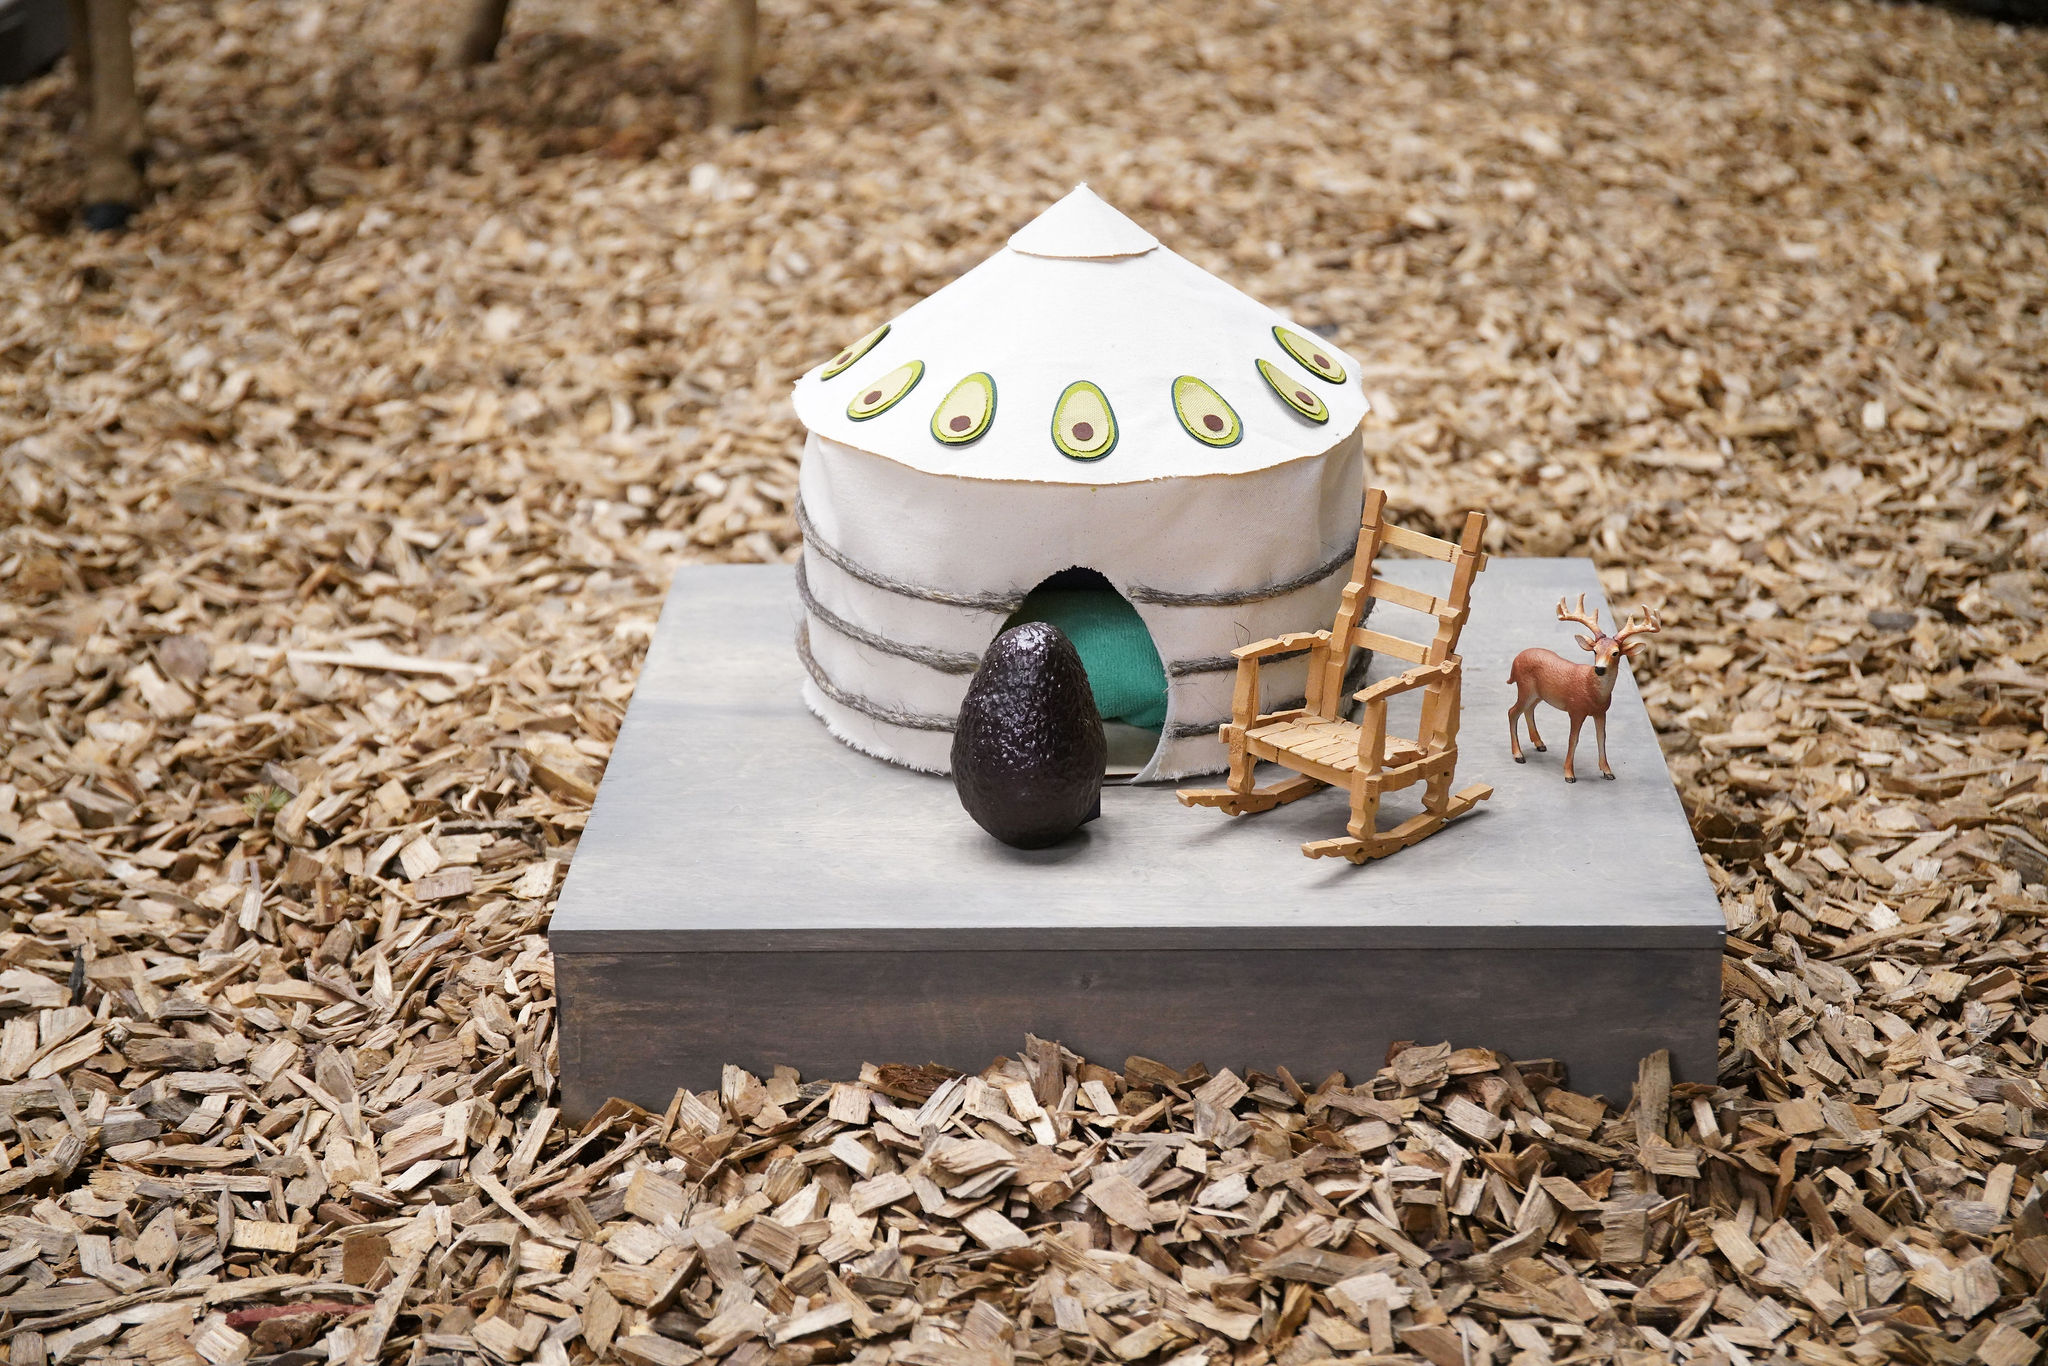 A yurt for your Avocados From Mexico? Why of course! The perfect gift to ensure your favorite avocado is protected, warm and comfortable during the Big Game. Avocados From Mexico/Dale Wilcox